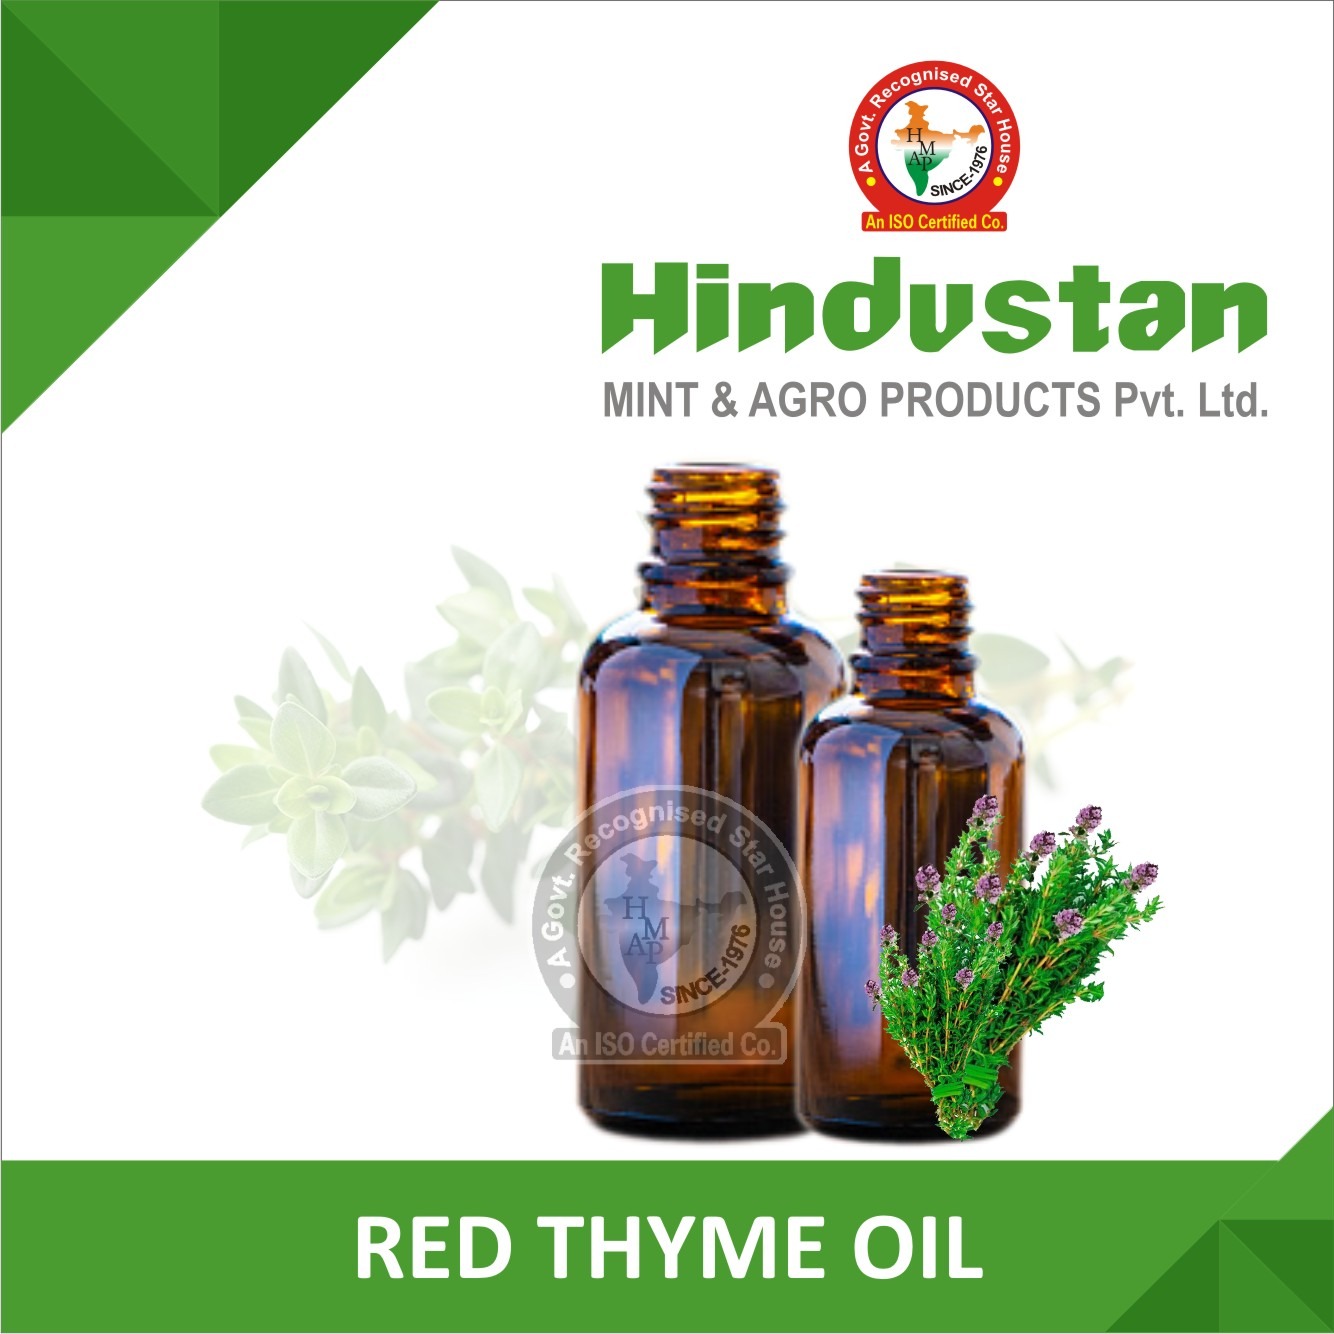 RED THYME OIL RCO 5637